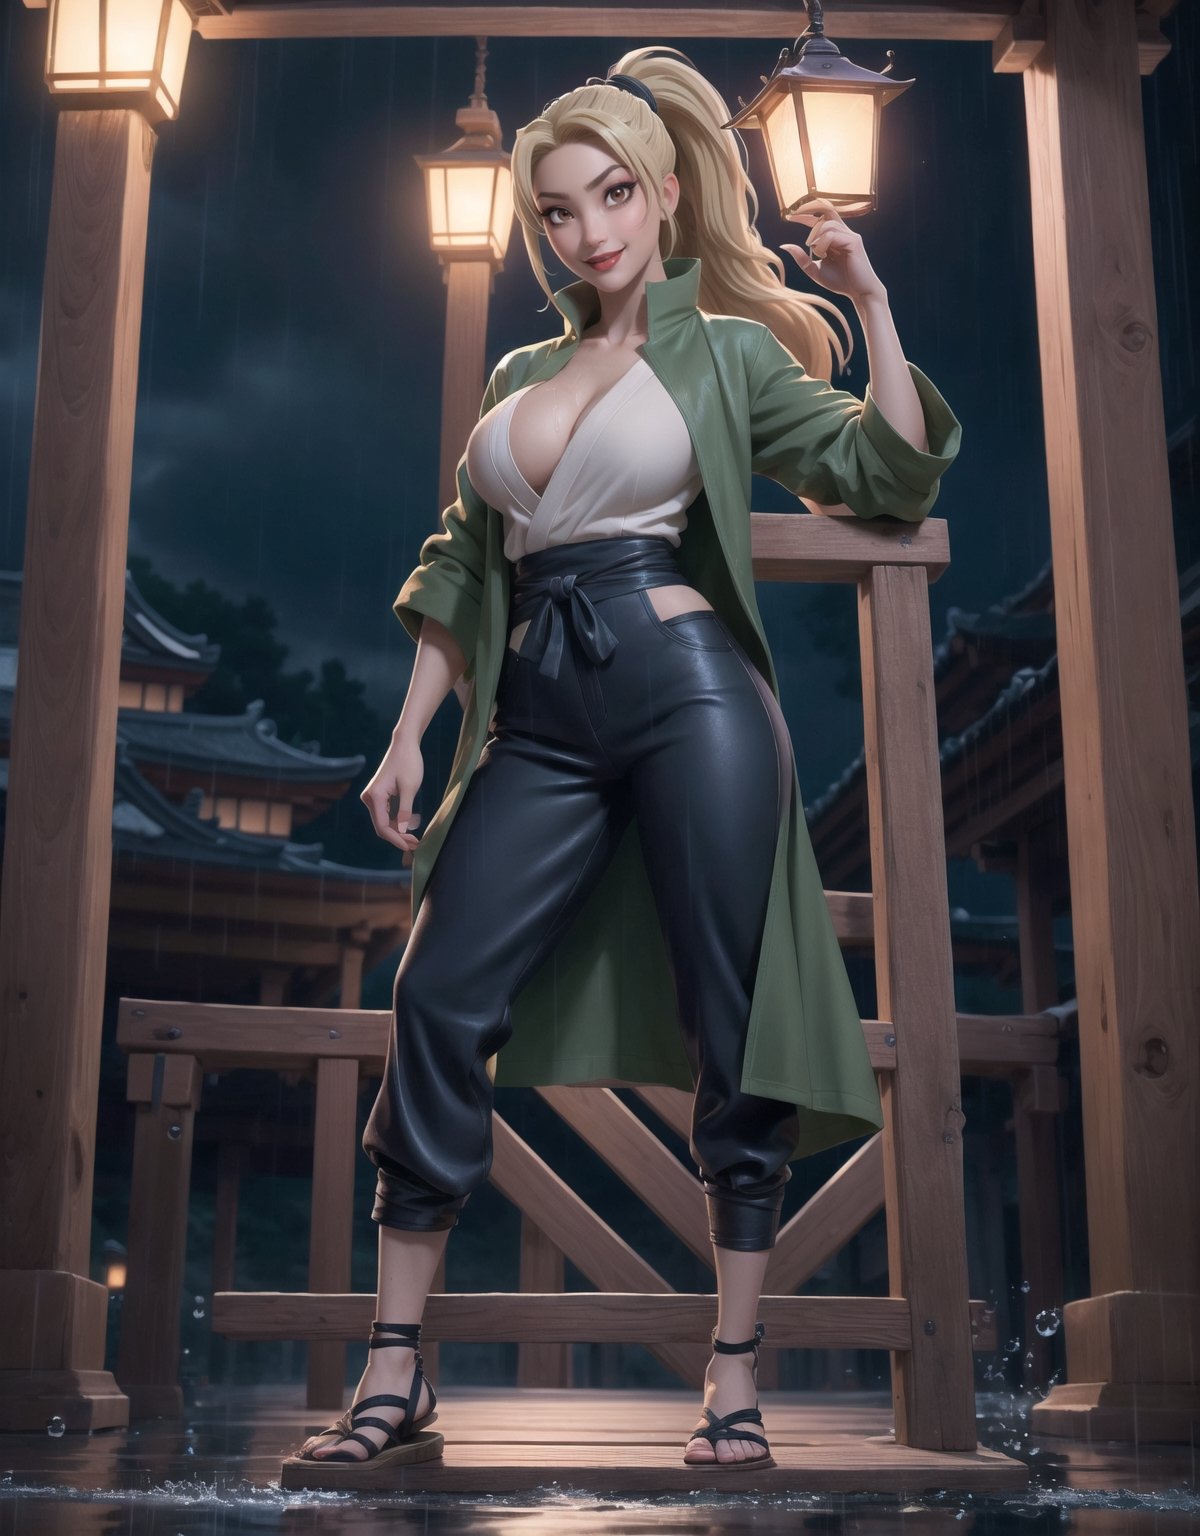 Masterpiece in UHD resolution, sharp details. Style inspired by ((Naruto Shippuden)), a fusion of anime and realism. | ((Tsunade)), a 30-year-old woman, looks stunning in a ninja temple at night, under heavy rain. Wearing a tight green coat, a collarless white shirt, dark blue trousers, and black leather sandals, her attire stands out, shaping her body perfectly. ((Gigantic_breasts)) are notable but do not overshadow her sincere gaze and the broad smile she offers to the viewer. Her long blonde hair, with an impressive frontal fringe, is tied in a ponytail. Tsunade stands in an open area of the temple, surrounded by structures of black marble, altars with ninja inscriptions, imposing pillars, and a statue of an ancient Hokage. Candles on the walls and wooden structures complete the scene, creating an authentic ninja atmosphere. | The scene is captured at a medium angle, enhancing Tsunade's elegant posture as she stares directly at the viewer, conveying confidence and determination. The intense rain adds dynamism to the image, with water droplets running down Tsunade's face and splashing on the ground. The lighting is softened by the candles, highlighting the details of the tight outfit and the woman's radiant expression. | Impressive scene of Tsunade, a 30-year-old woman, in a ninja temple during the rainy night of Naruto Shippuden. | {The camera is positioned very close to her, revealing her entire body as she adopts a (sensual_pose), interacting with and leaning on a structure in the scene in an exciting way} | ((perfect_pose)), She is adopting a ((sensual_pose as interacts, boldly leaning on a structure, leaning back in an exciting way):1.3), ((full body)), (perfect_fingers:1.0), (perfect_legs:1.0), More_Detail, realhands